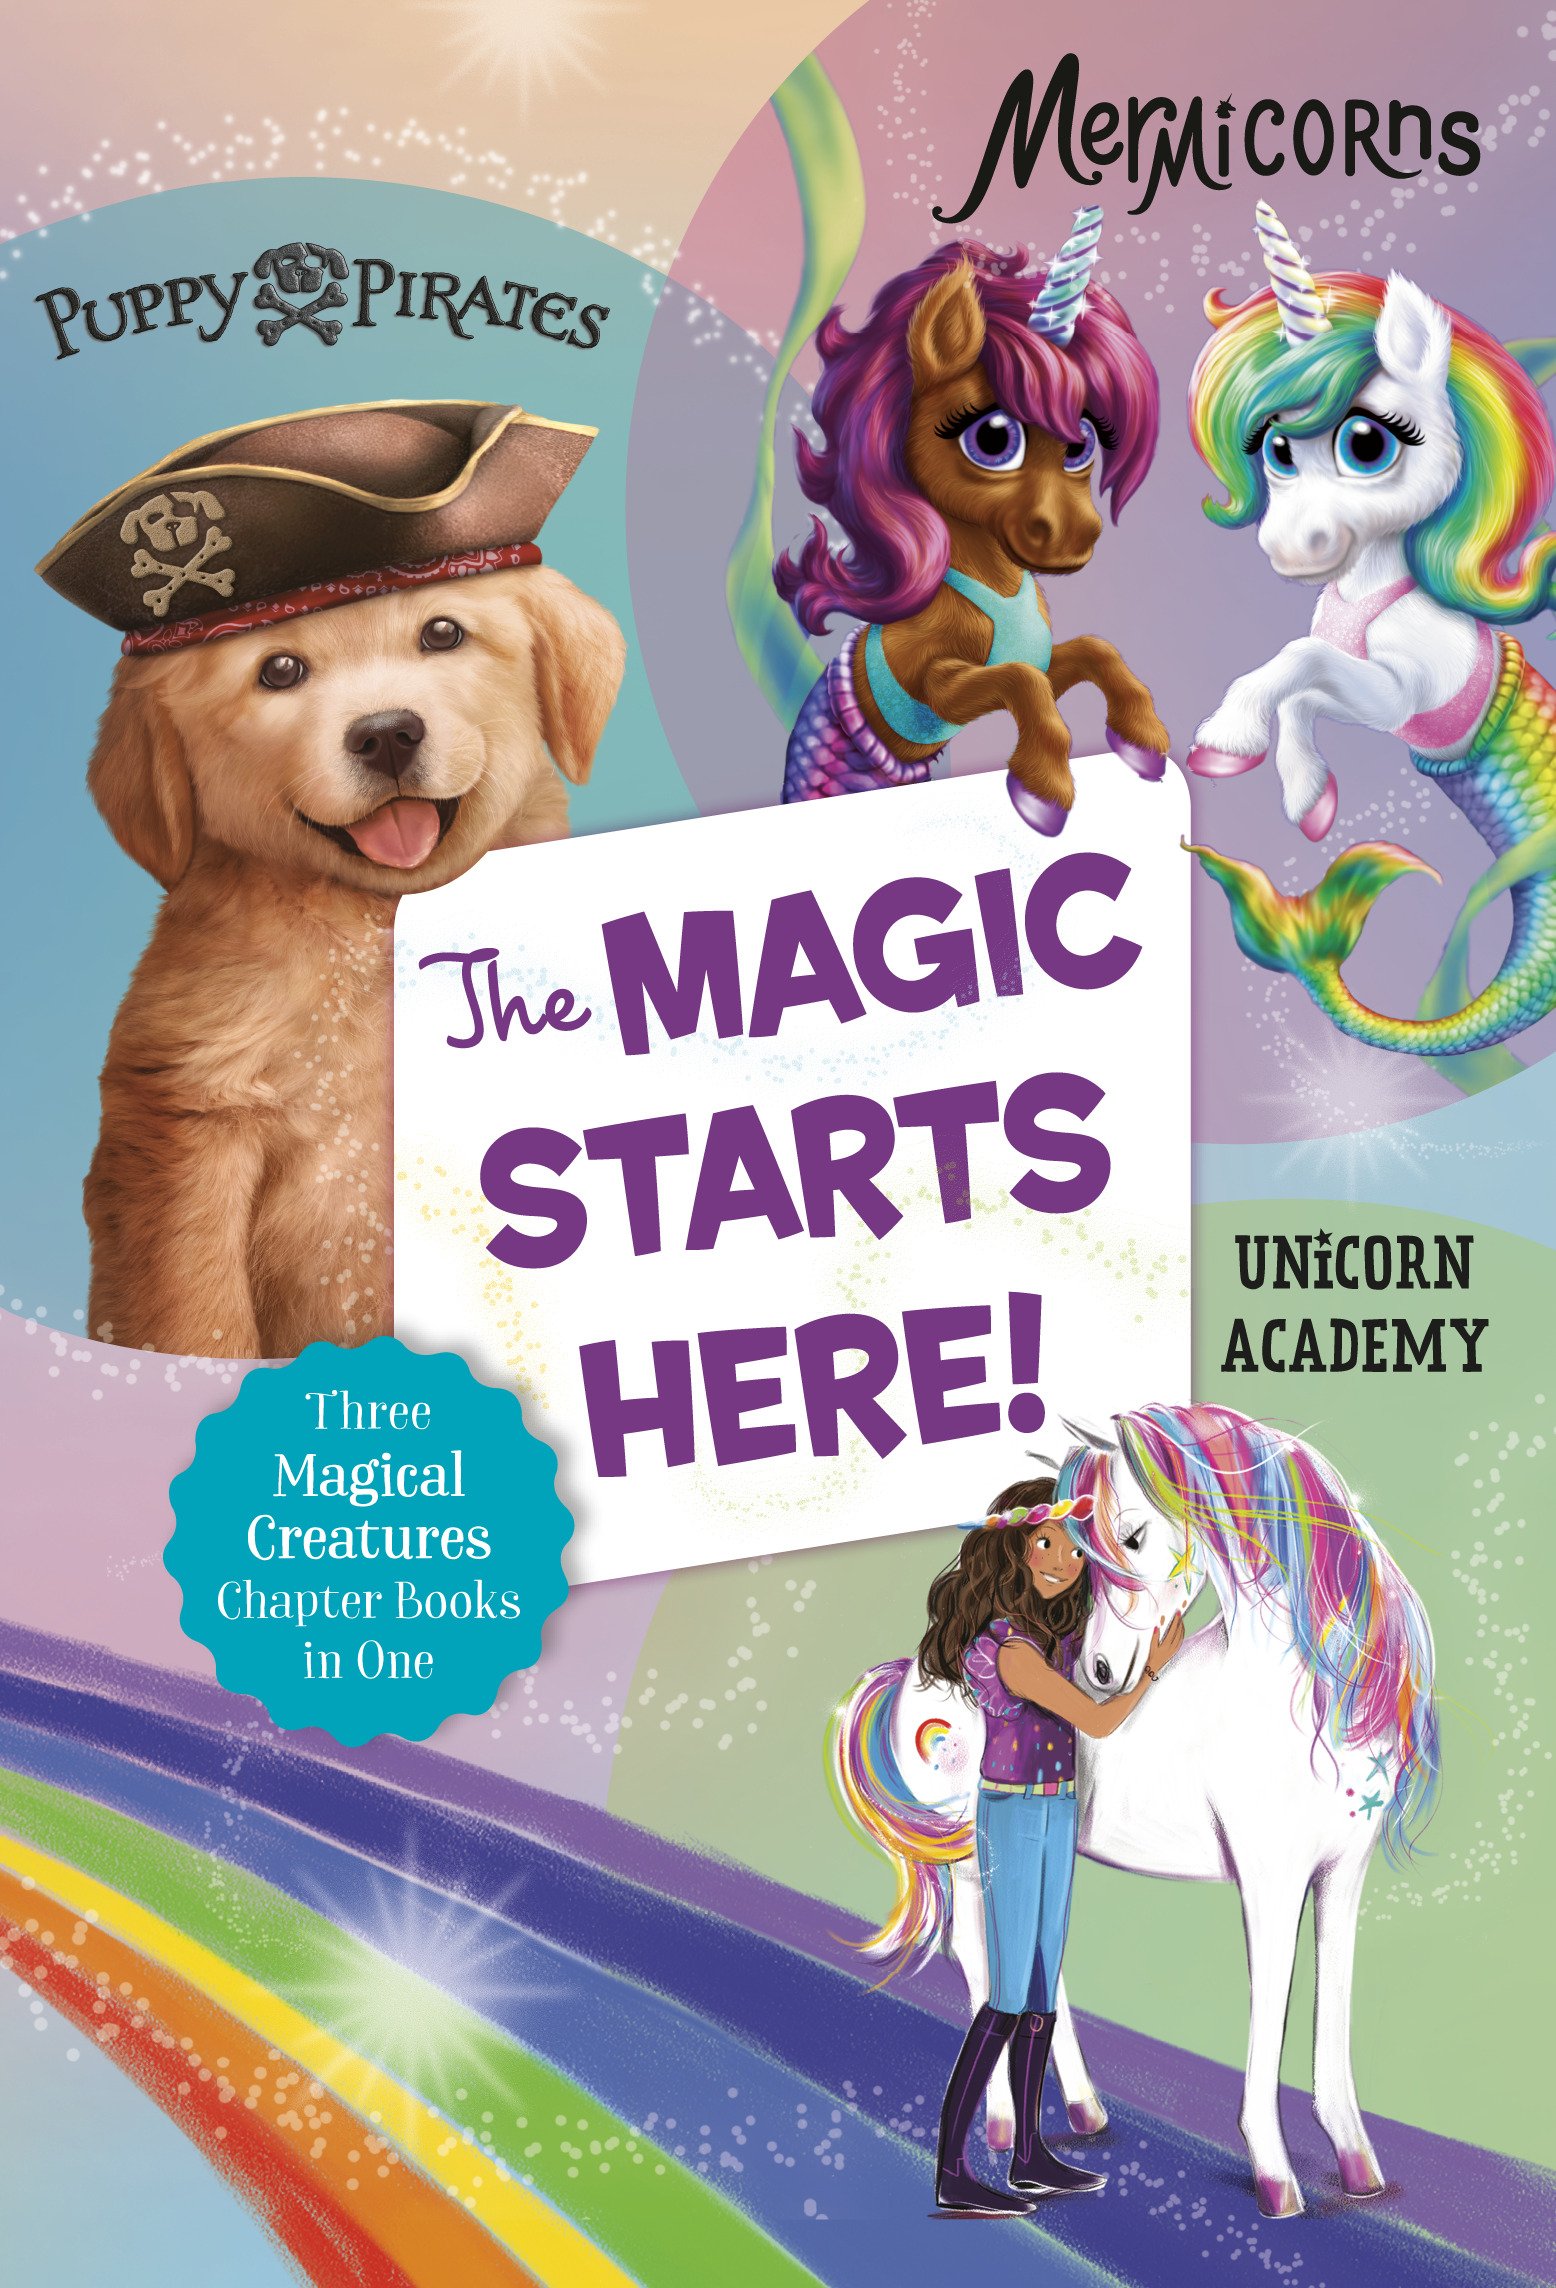 The Magic Starts Here! : Three Magical Creatures Chapter Books in One: Puppy Pirates, Mermicorns, and Unicorn Academy | Bardhan-Quallen, Sudipta